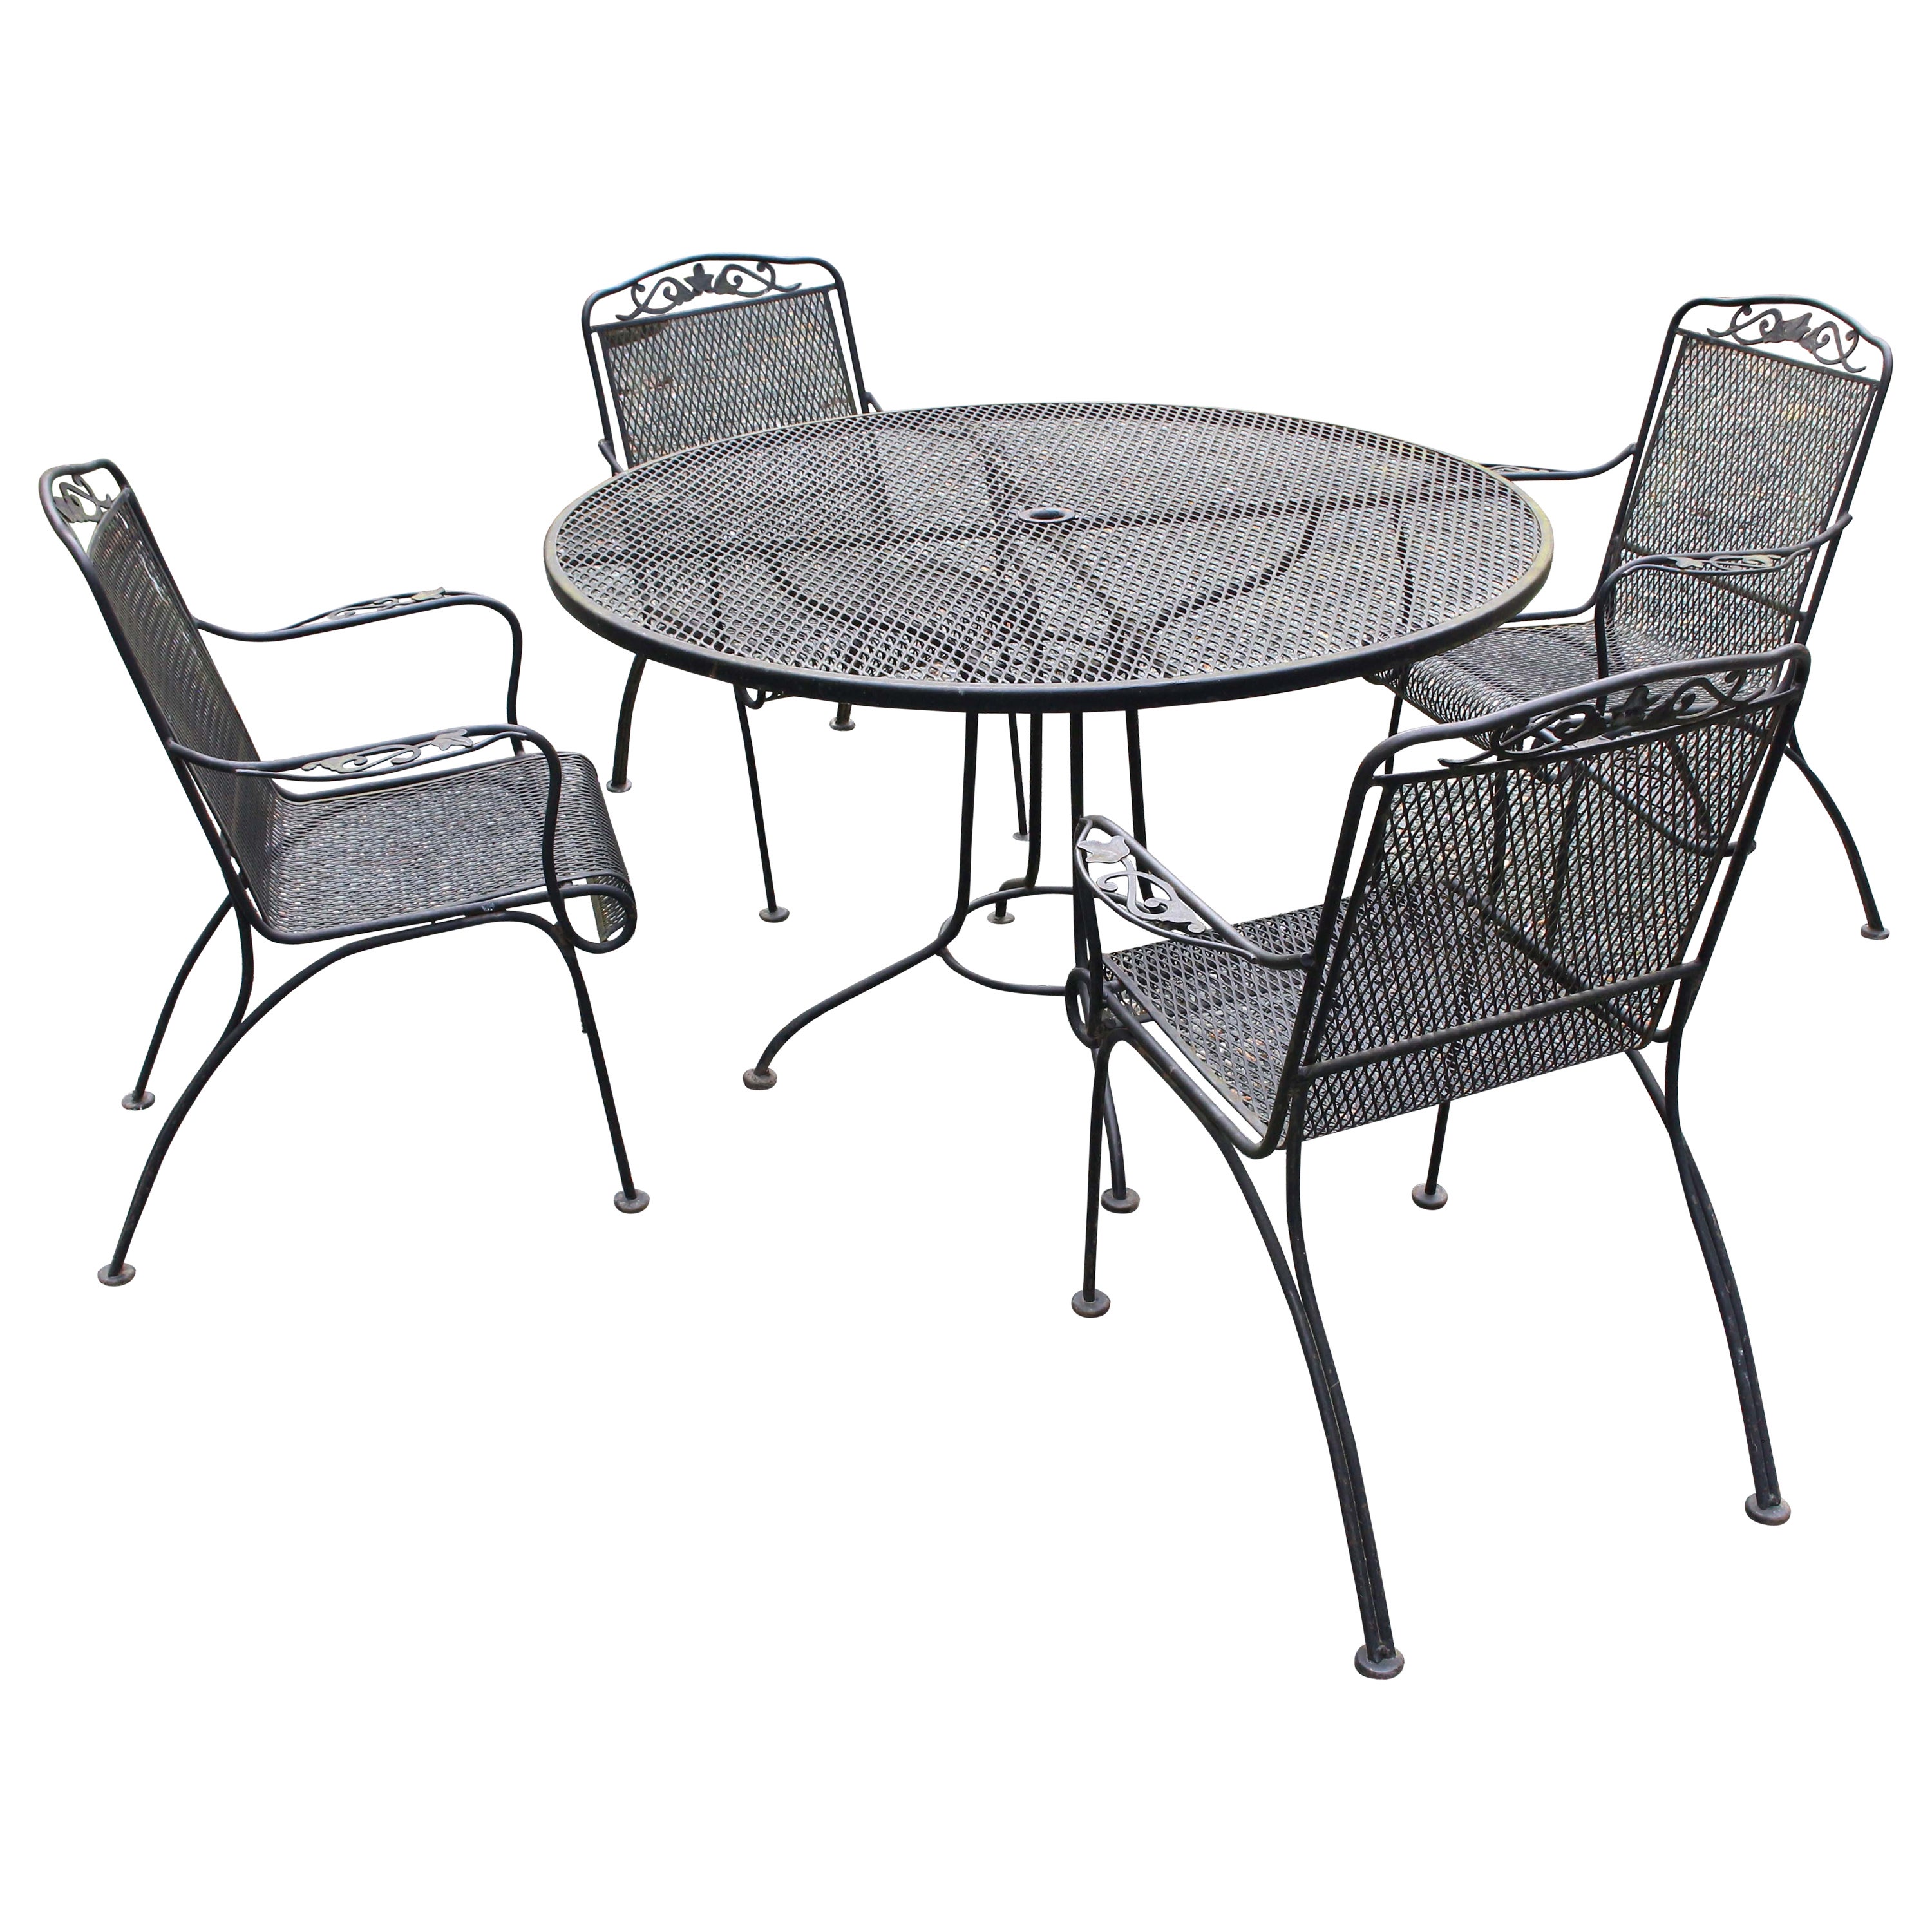 Mid-20th Century Woodard Wrought Iron Table & 4 Arm Chairs For Sale